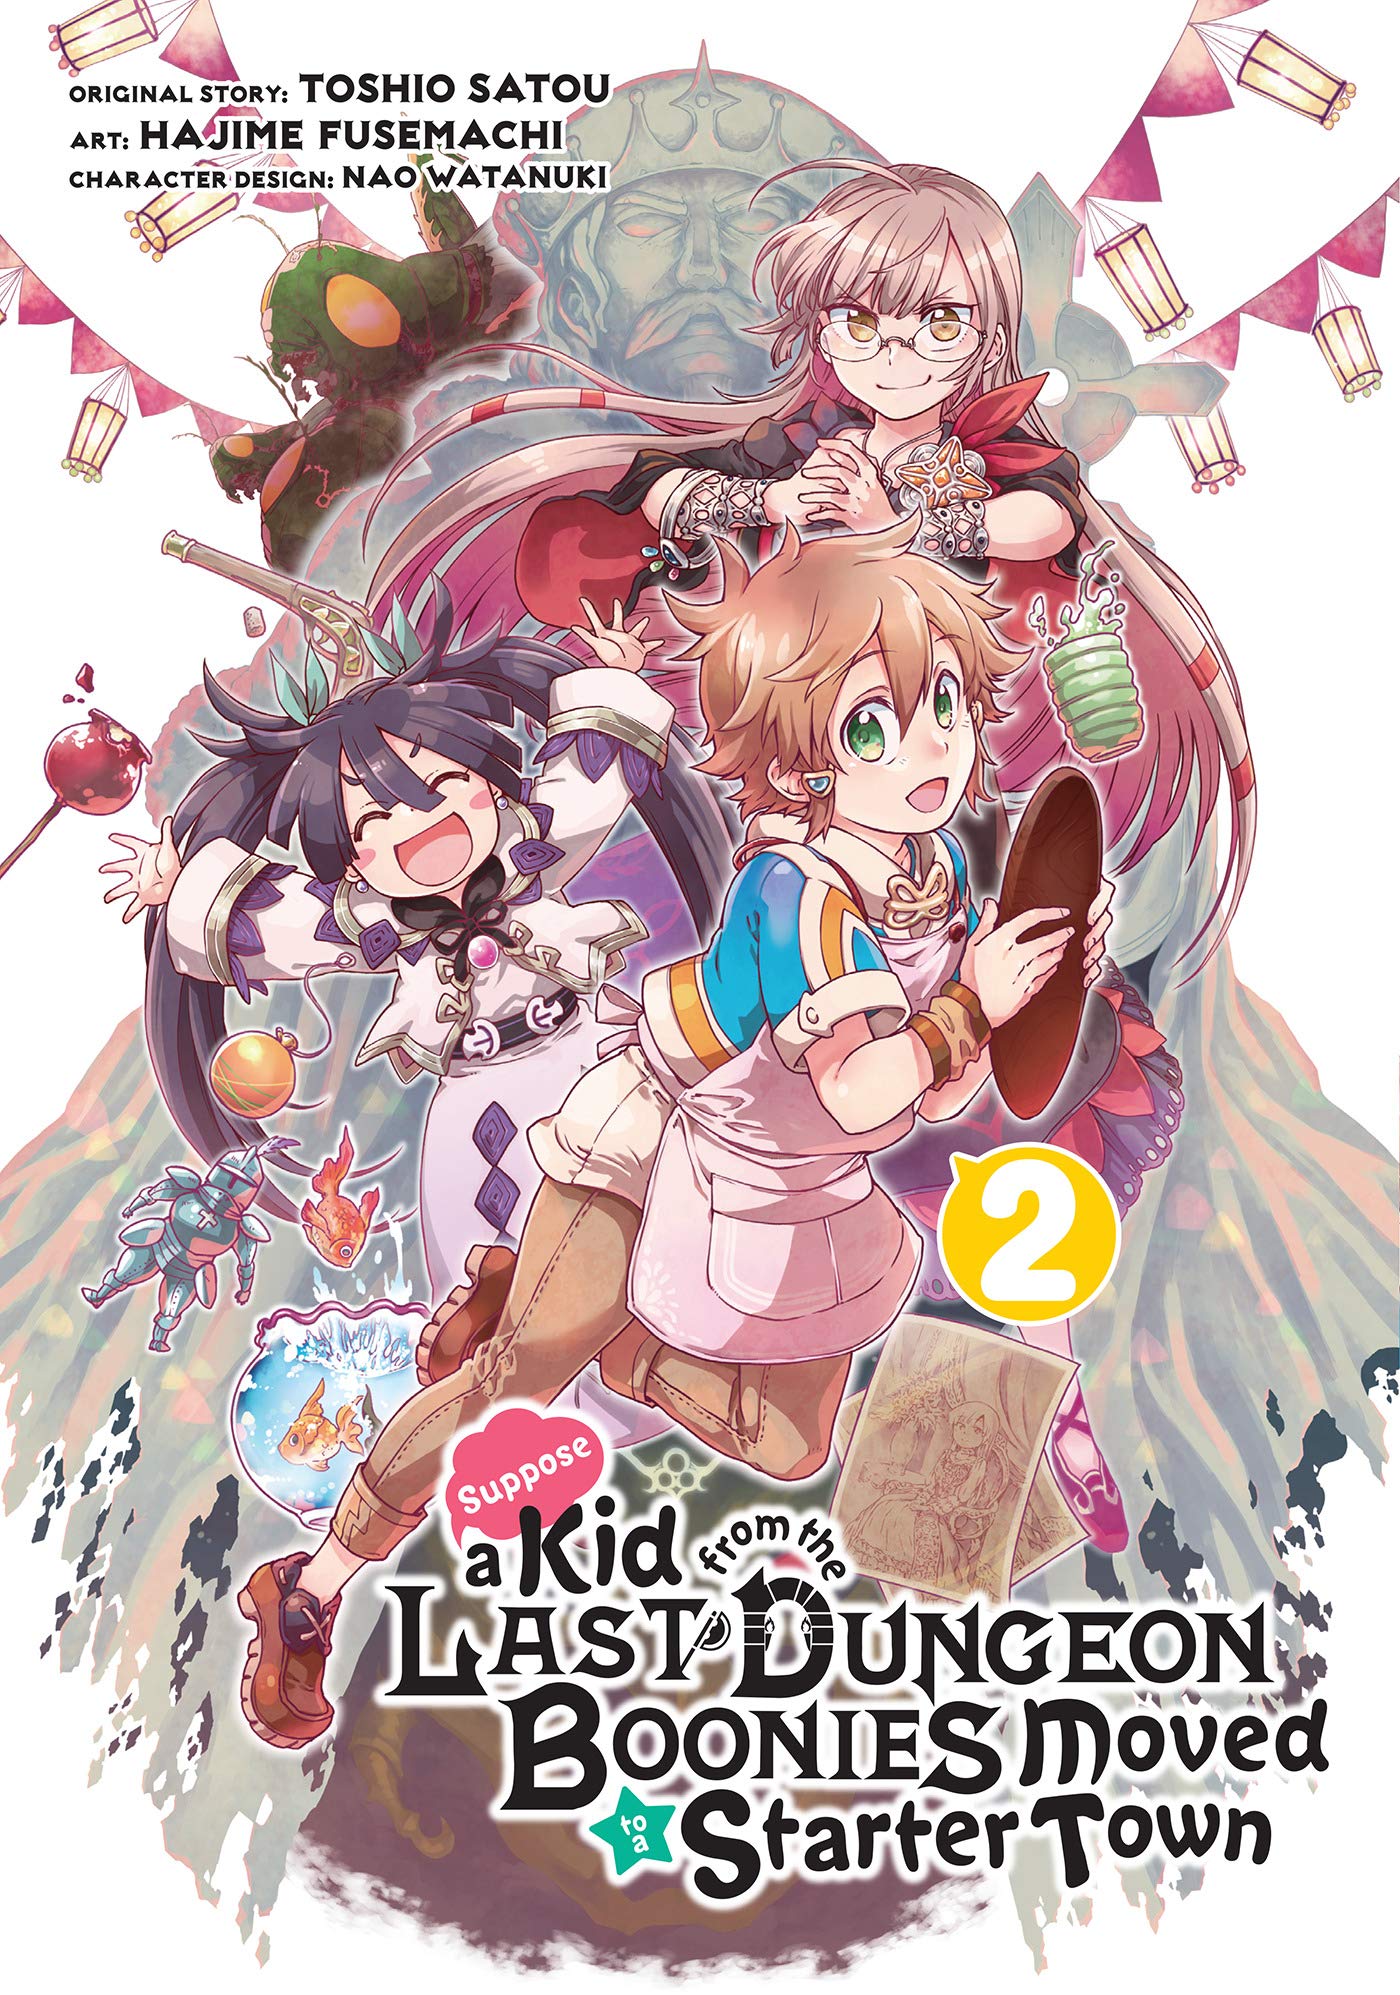 Suppose a Kid from the Last Dungeon Mobile Game Arrives in Fall